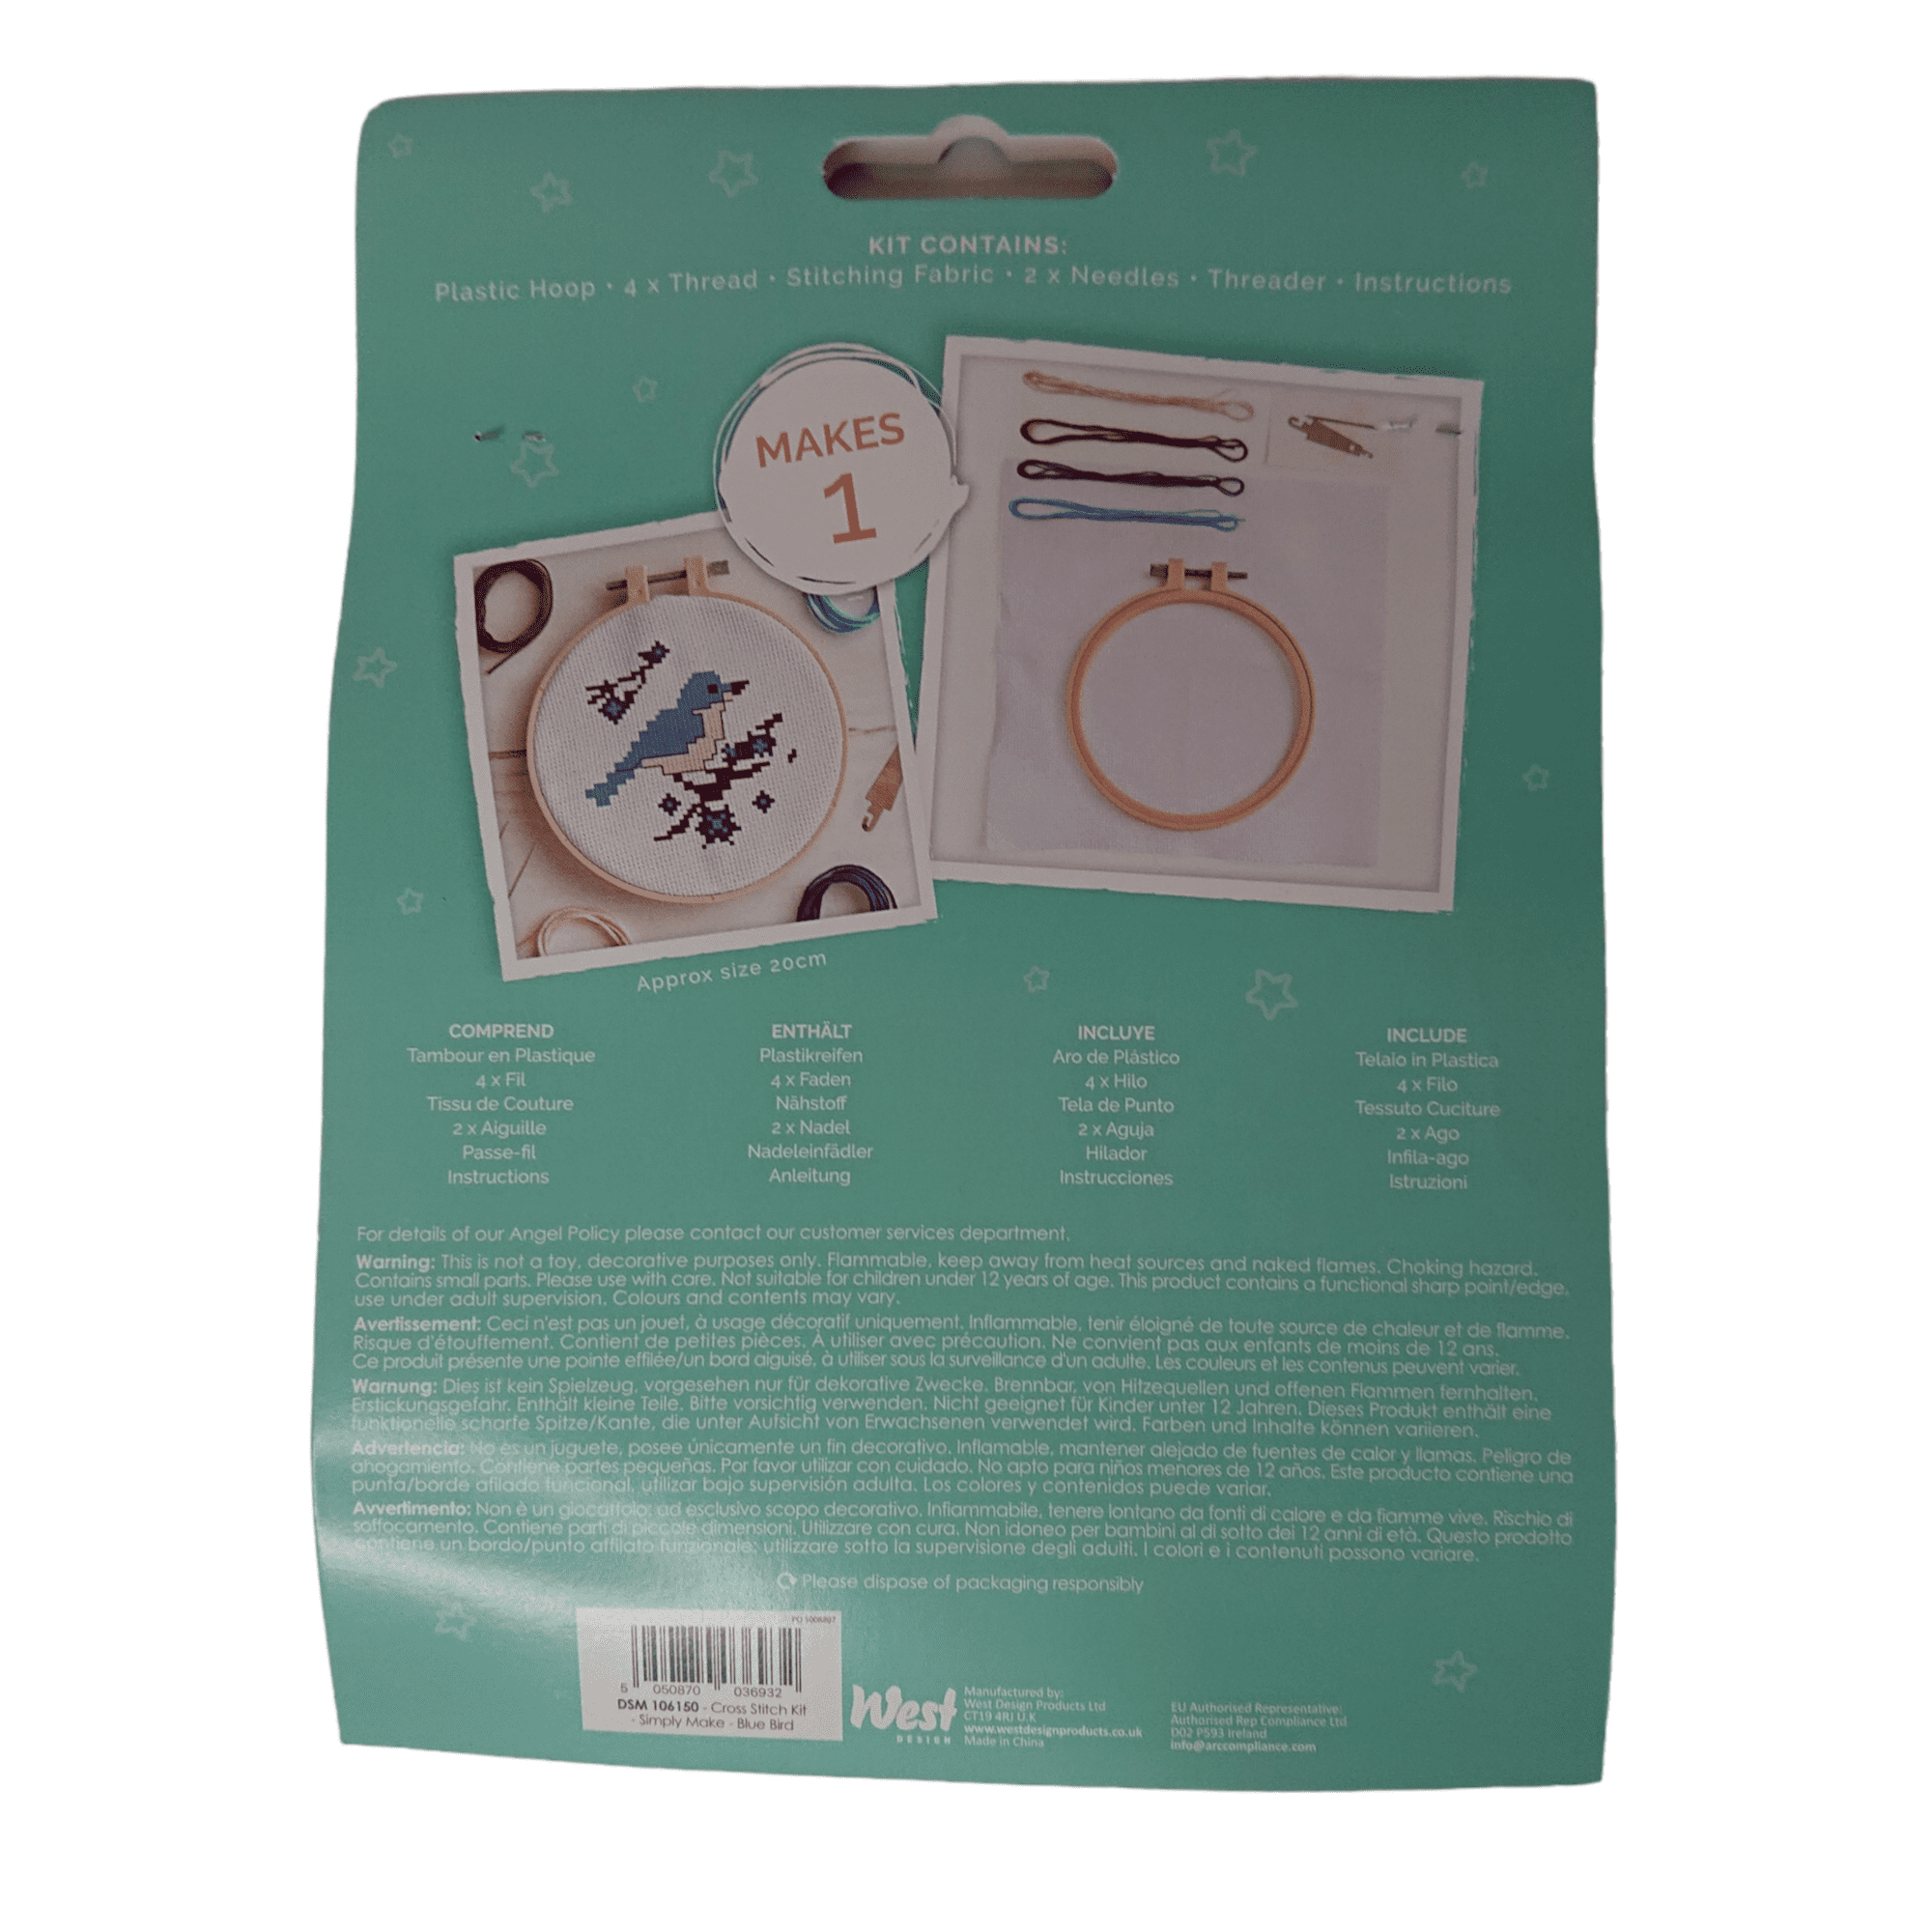 blue bird simple cross stitch kit with hoop, thread, needles, instructions, threader and fabric